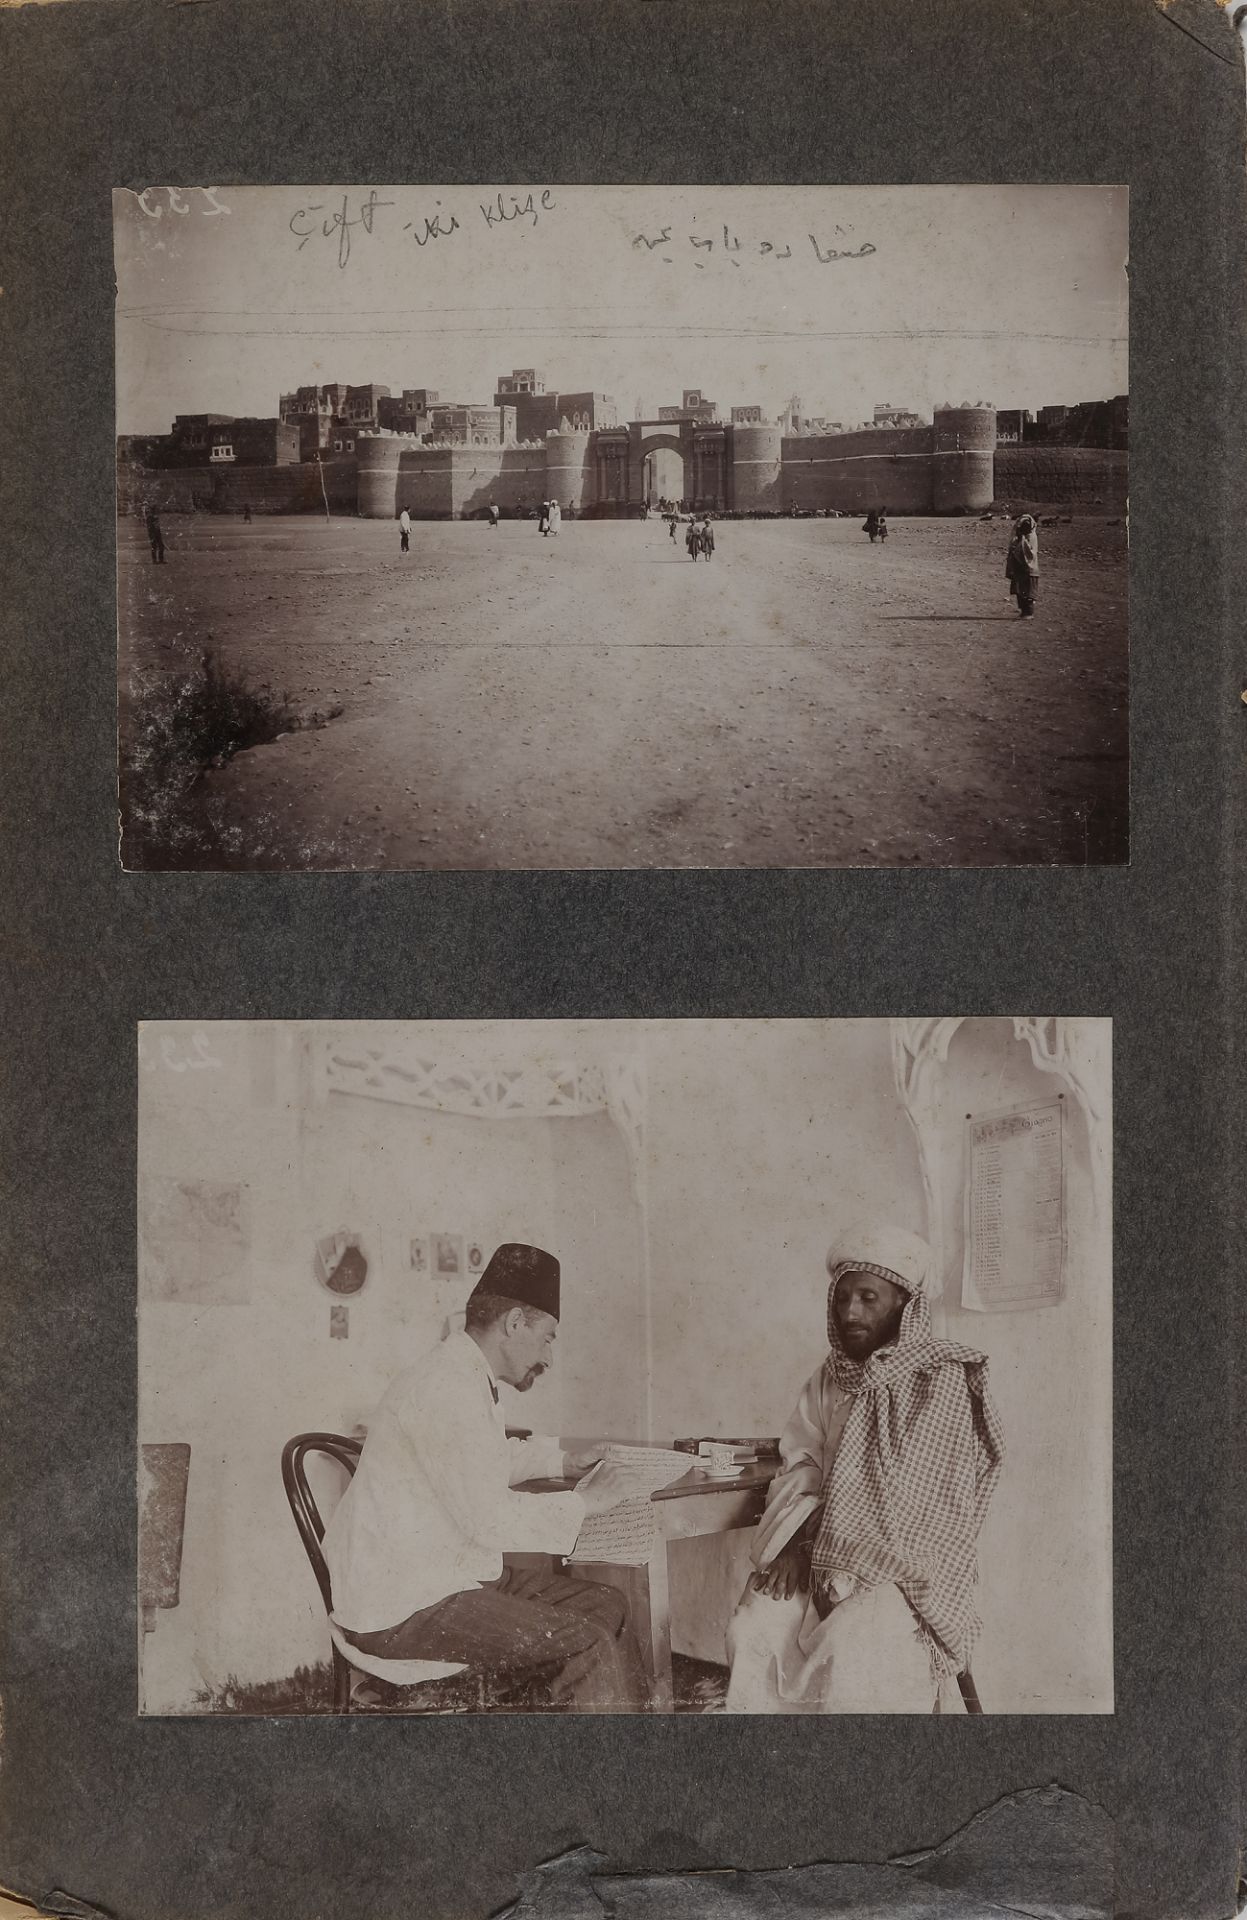 A RARE ARCHIVE ABOUT YEMEN, BELONGED TO AHMED IZZET PASHA - Image 73 of 77